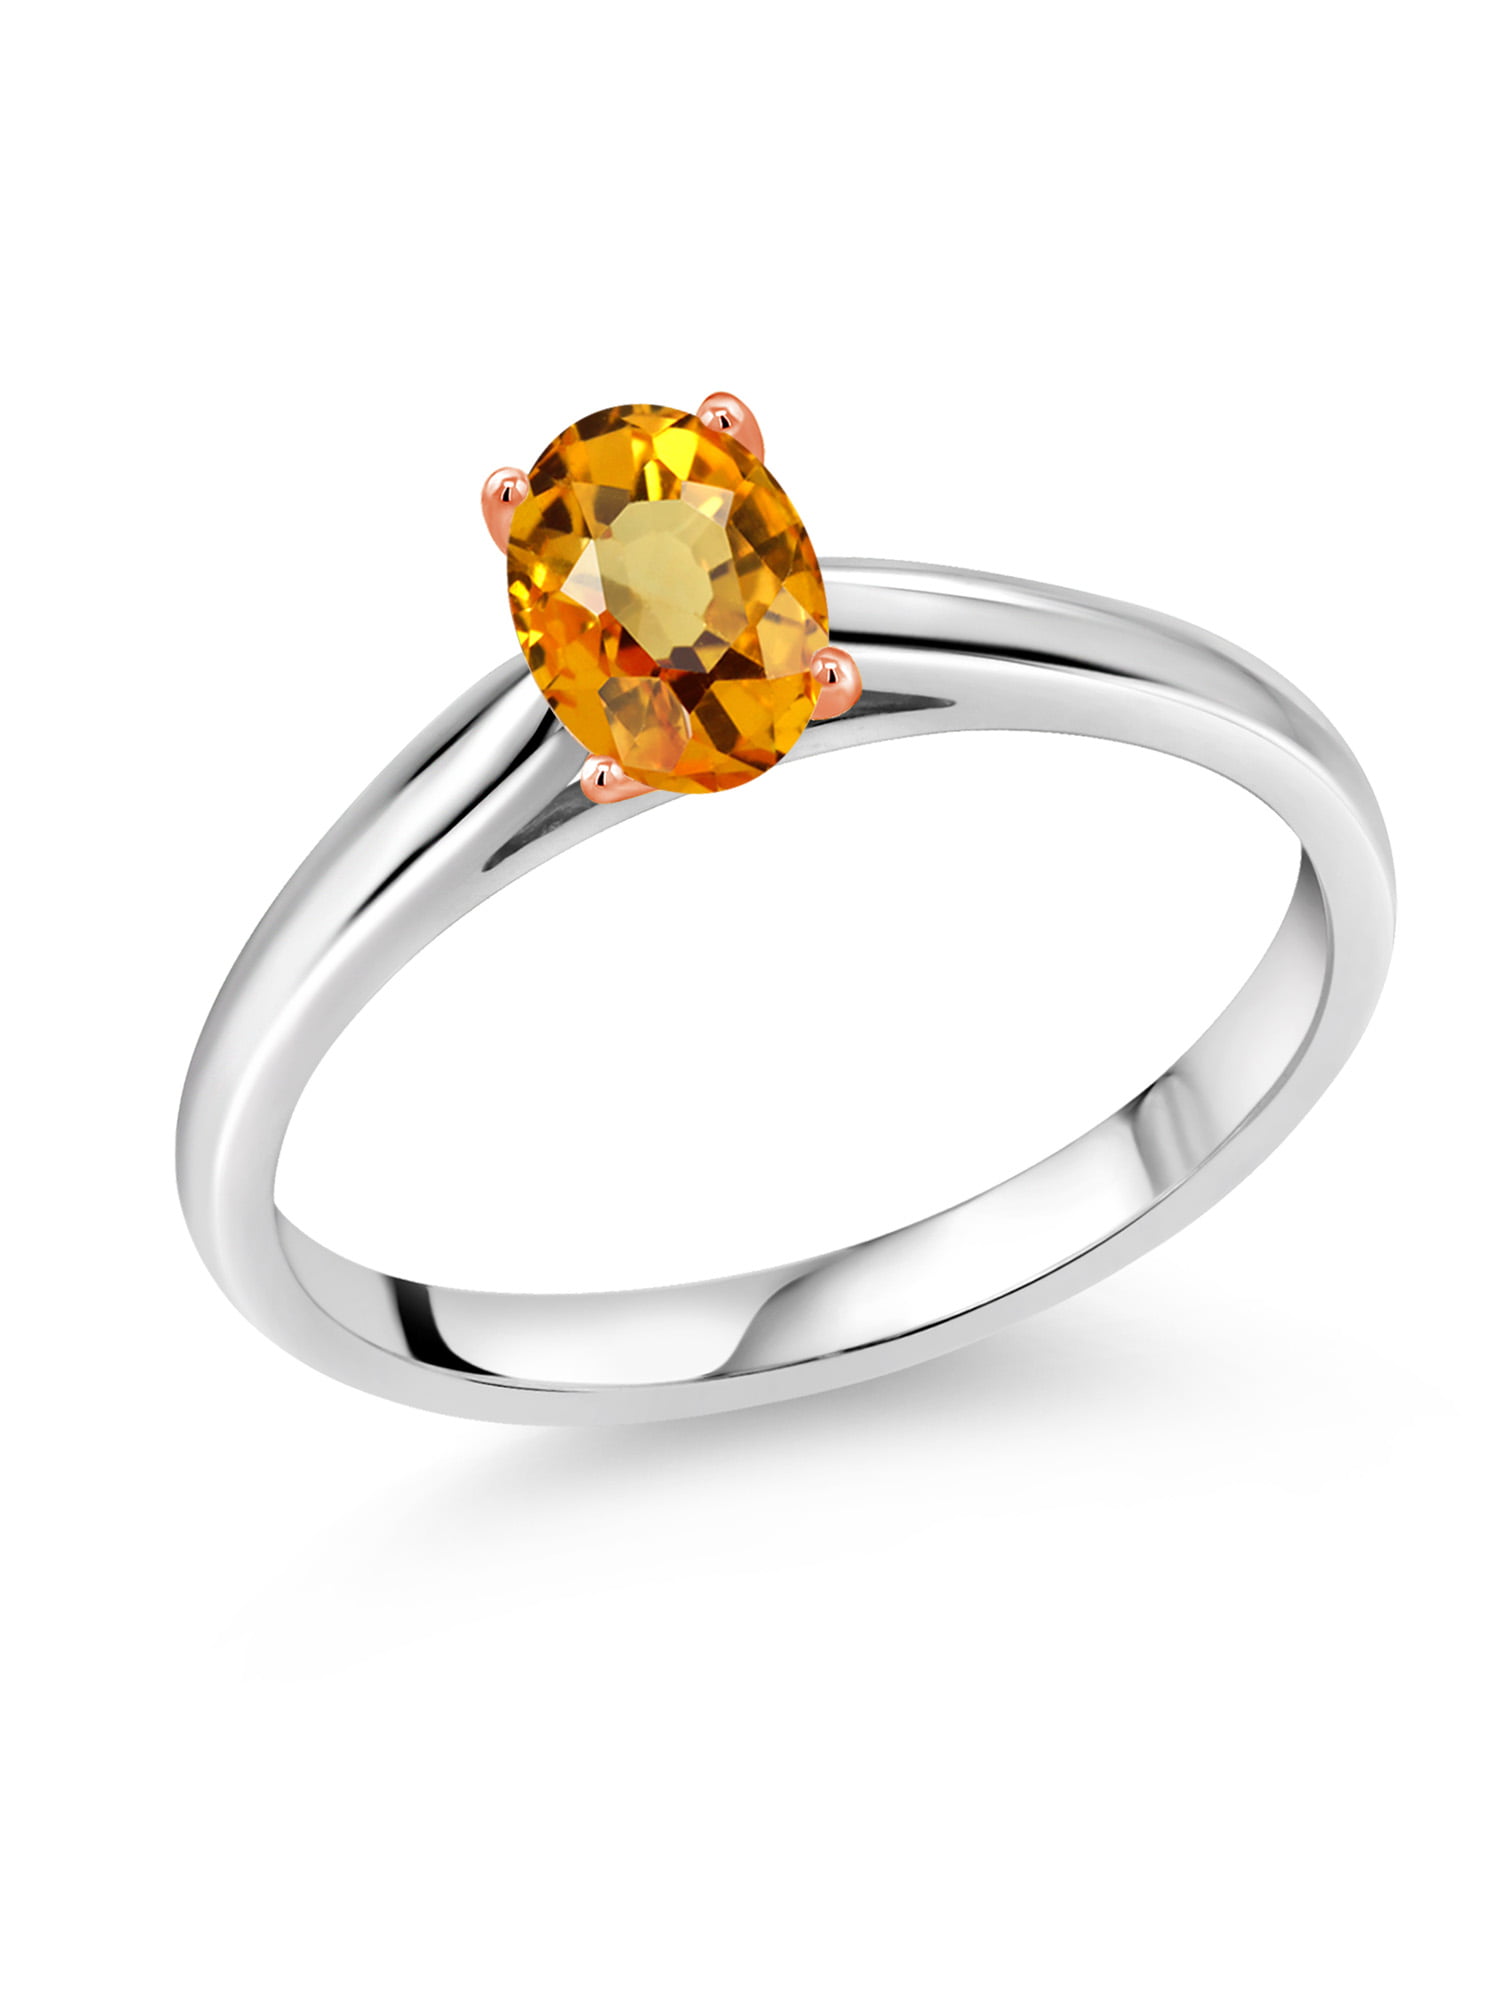 SVC-JEWELS 14K Black Gold Over 925 Sterling Silver Round Cut Yellow Sapphire Criss Cross X Wedding Band Ring Men